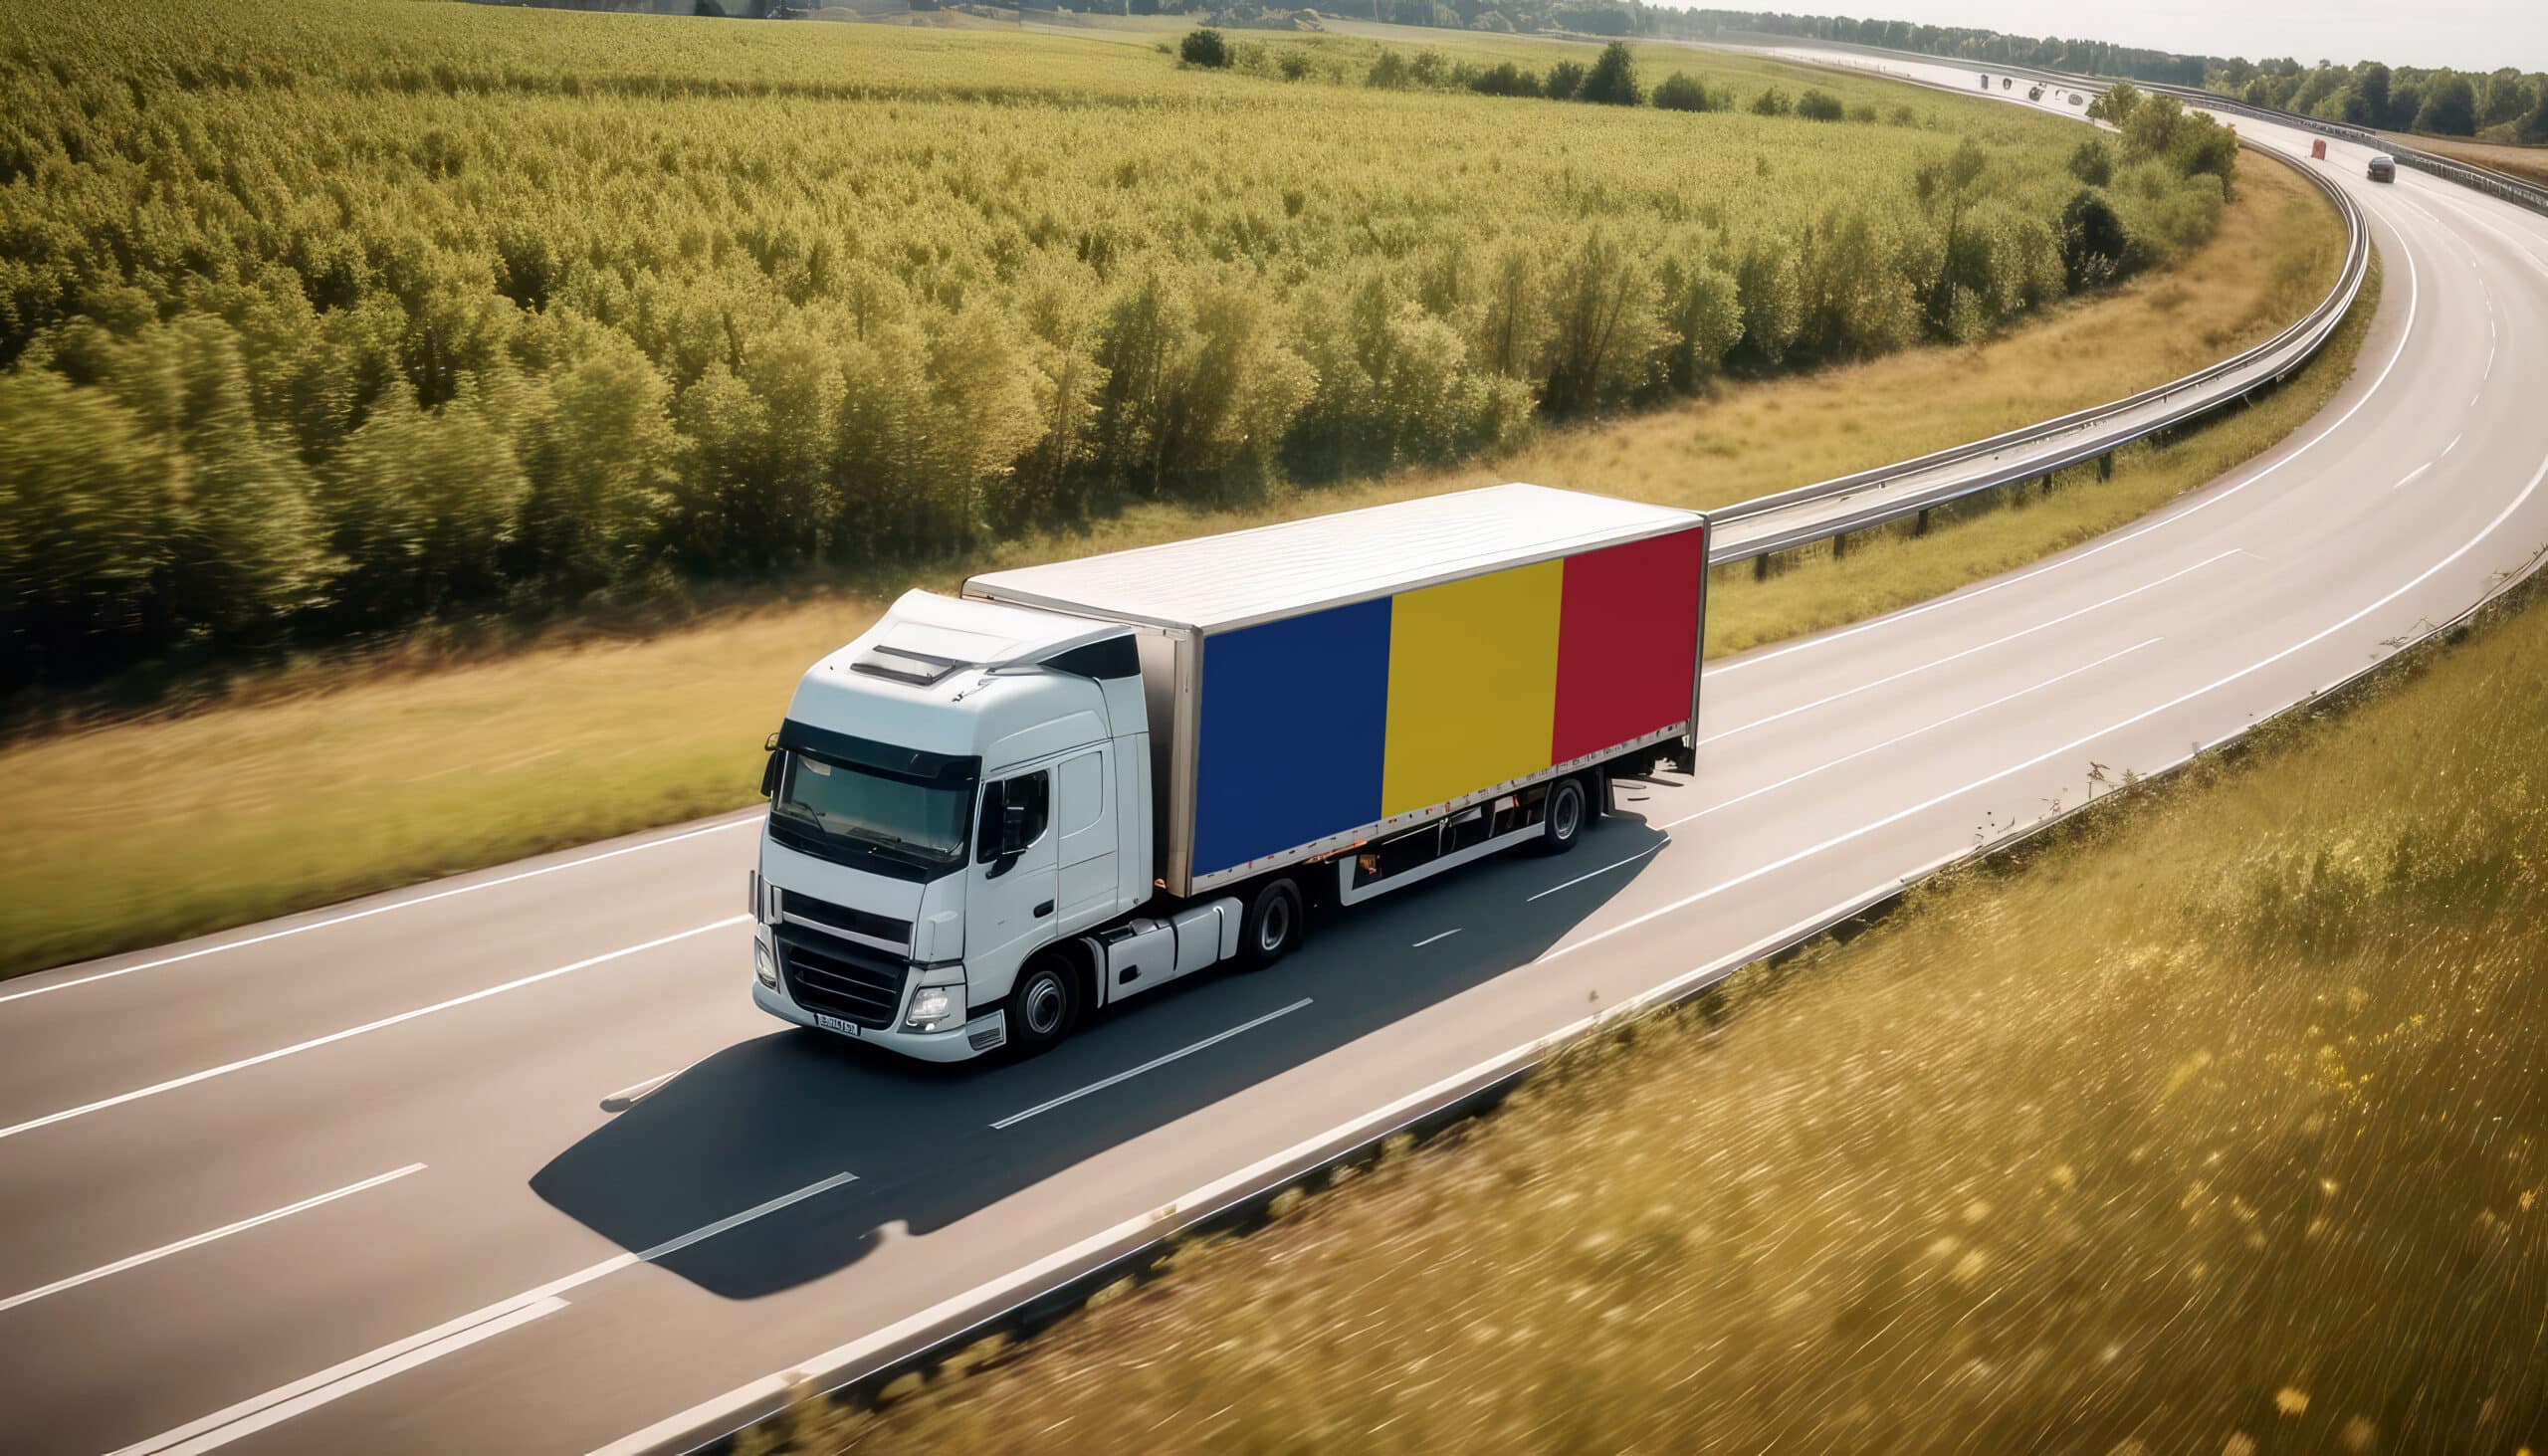 An Romania-flagged truck hauls cargo along the highway, embodying the essence of logistics and transportation in the Romania